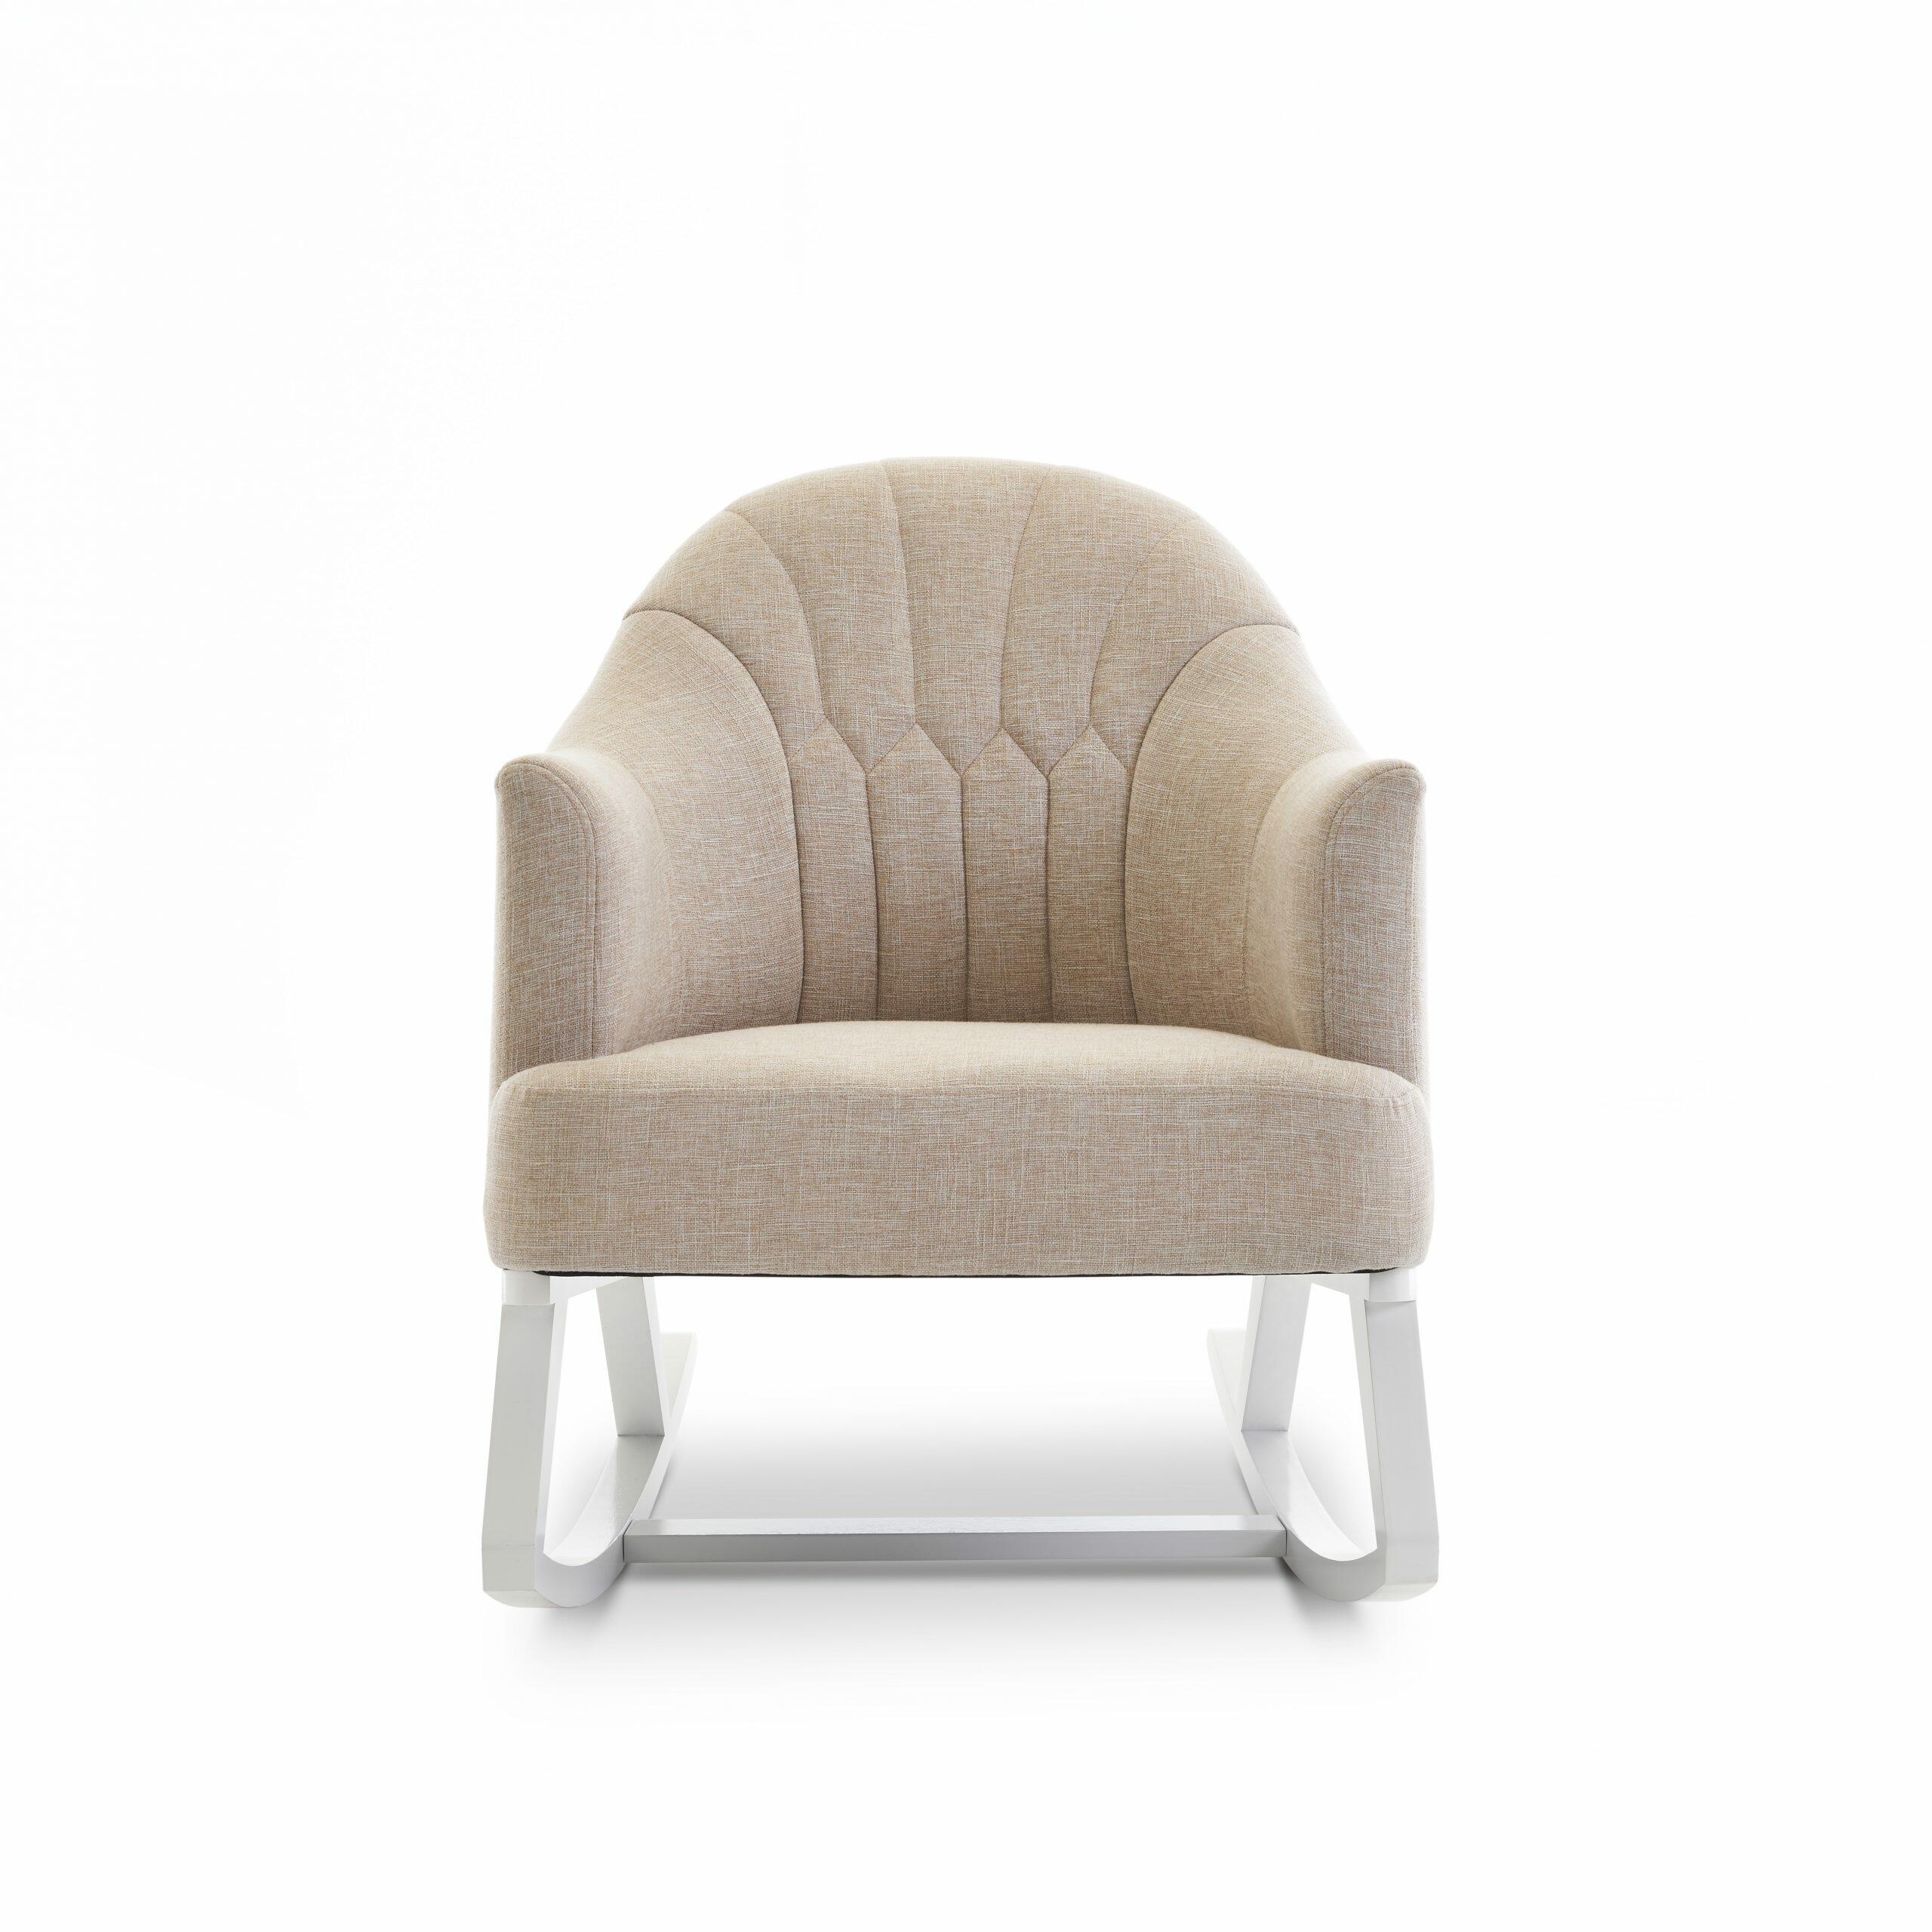 OBaby Round Back Nursery Rocking Chair in Oatmeal